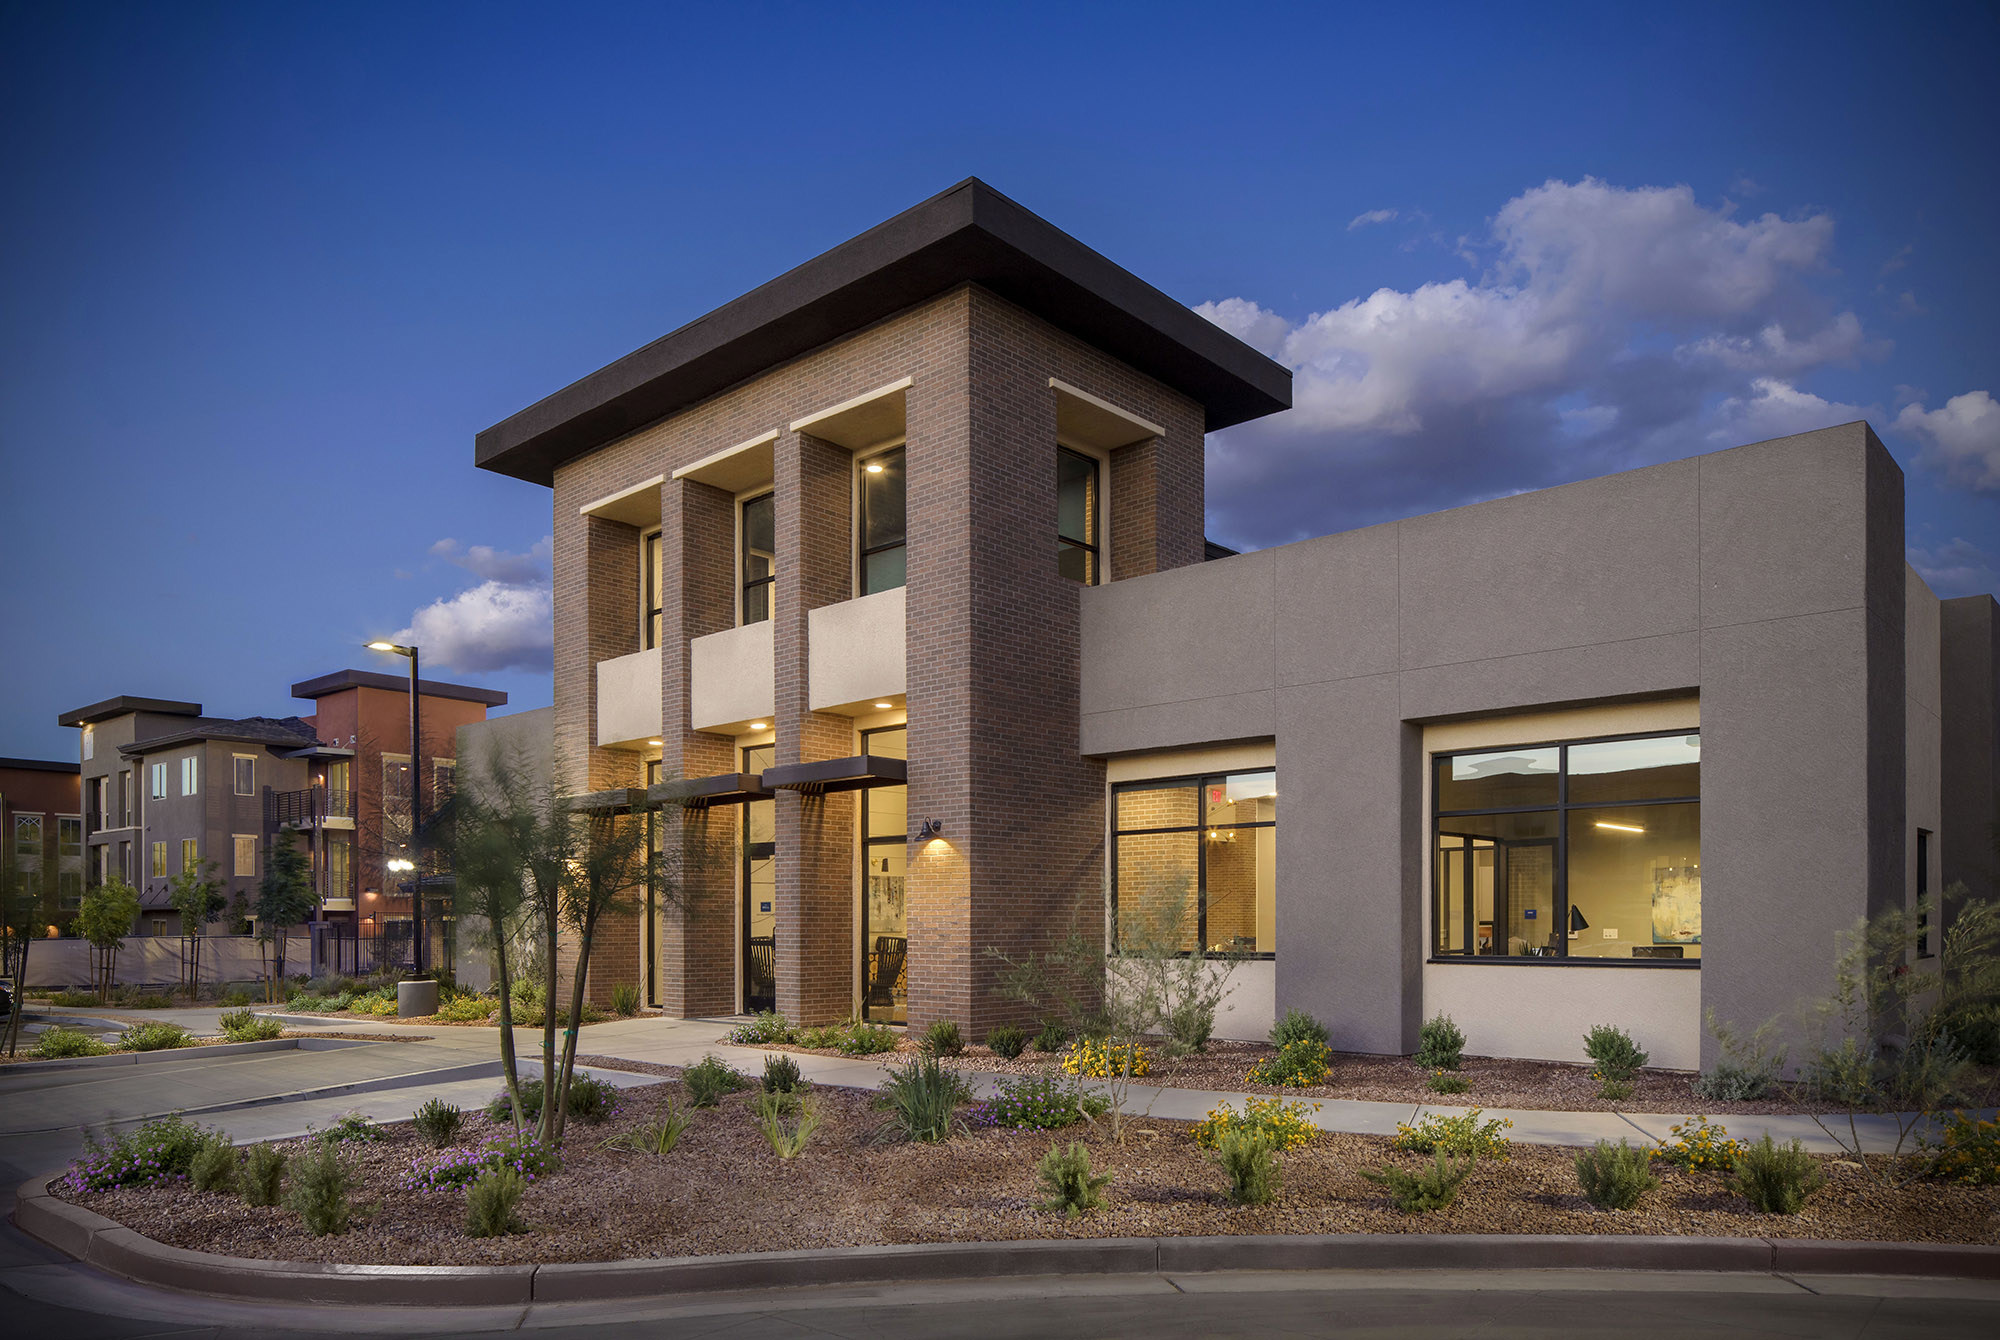 West Hollywood Developer Faring Expands Portfolio With Acquisition of 396-Unit The Well Apartments in Henderson, Nevada